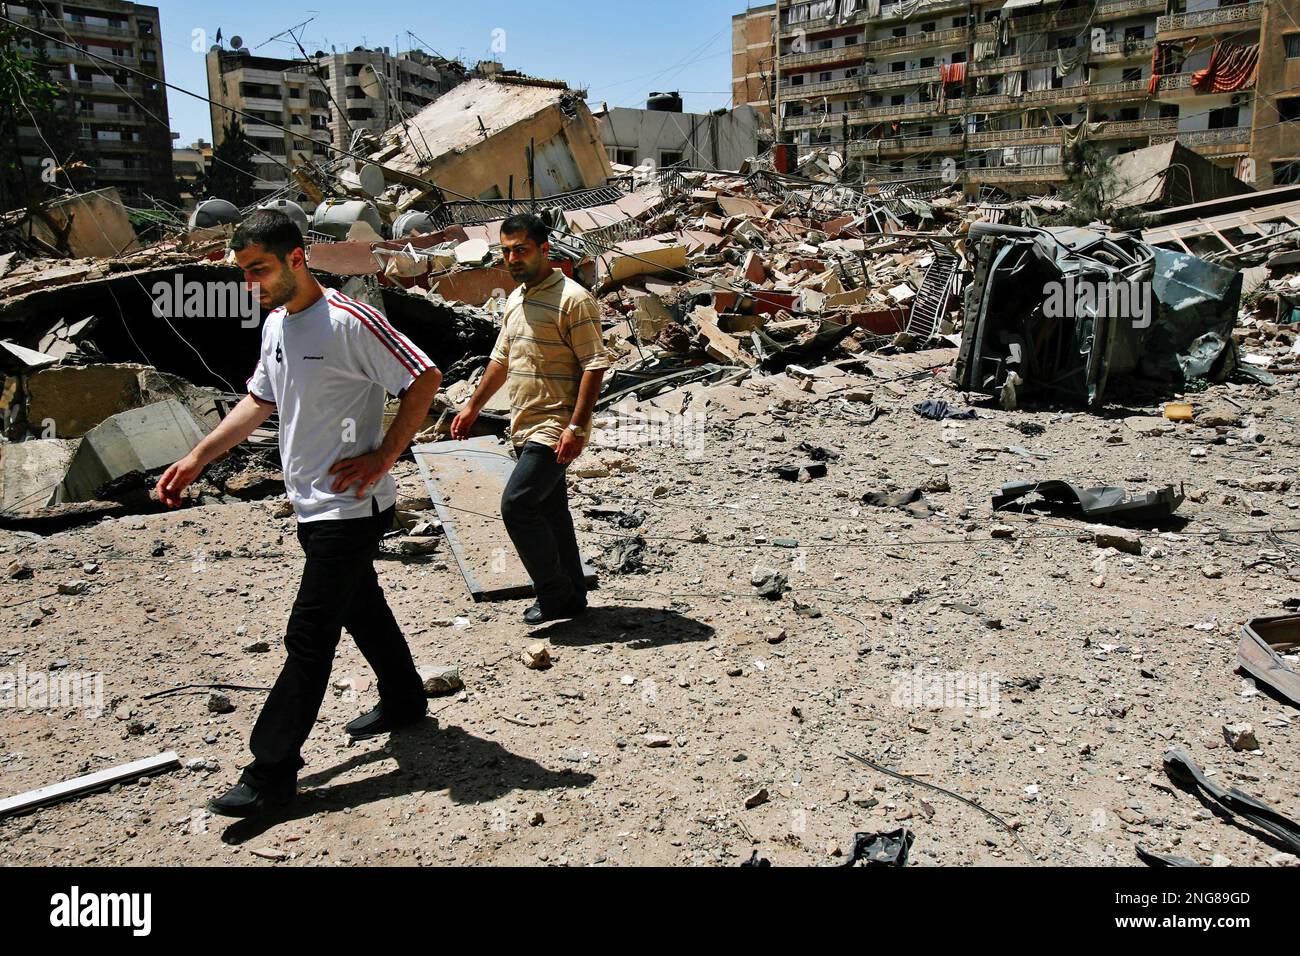 Lebanese men pass after viewing the destroyed building that used to house  the offices and studios of Hezbollah's Al-Nour radio station in the  Hezbollah stronghold suburbs of Beirut, Lebanon, Saturday, Aug. 12,